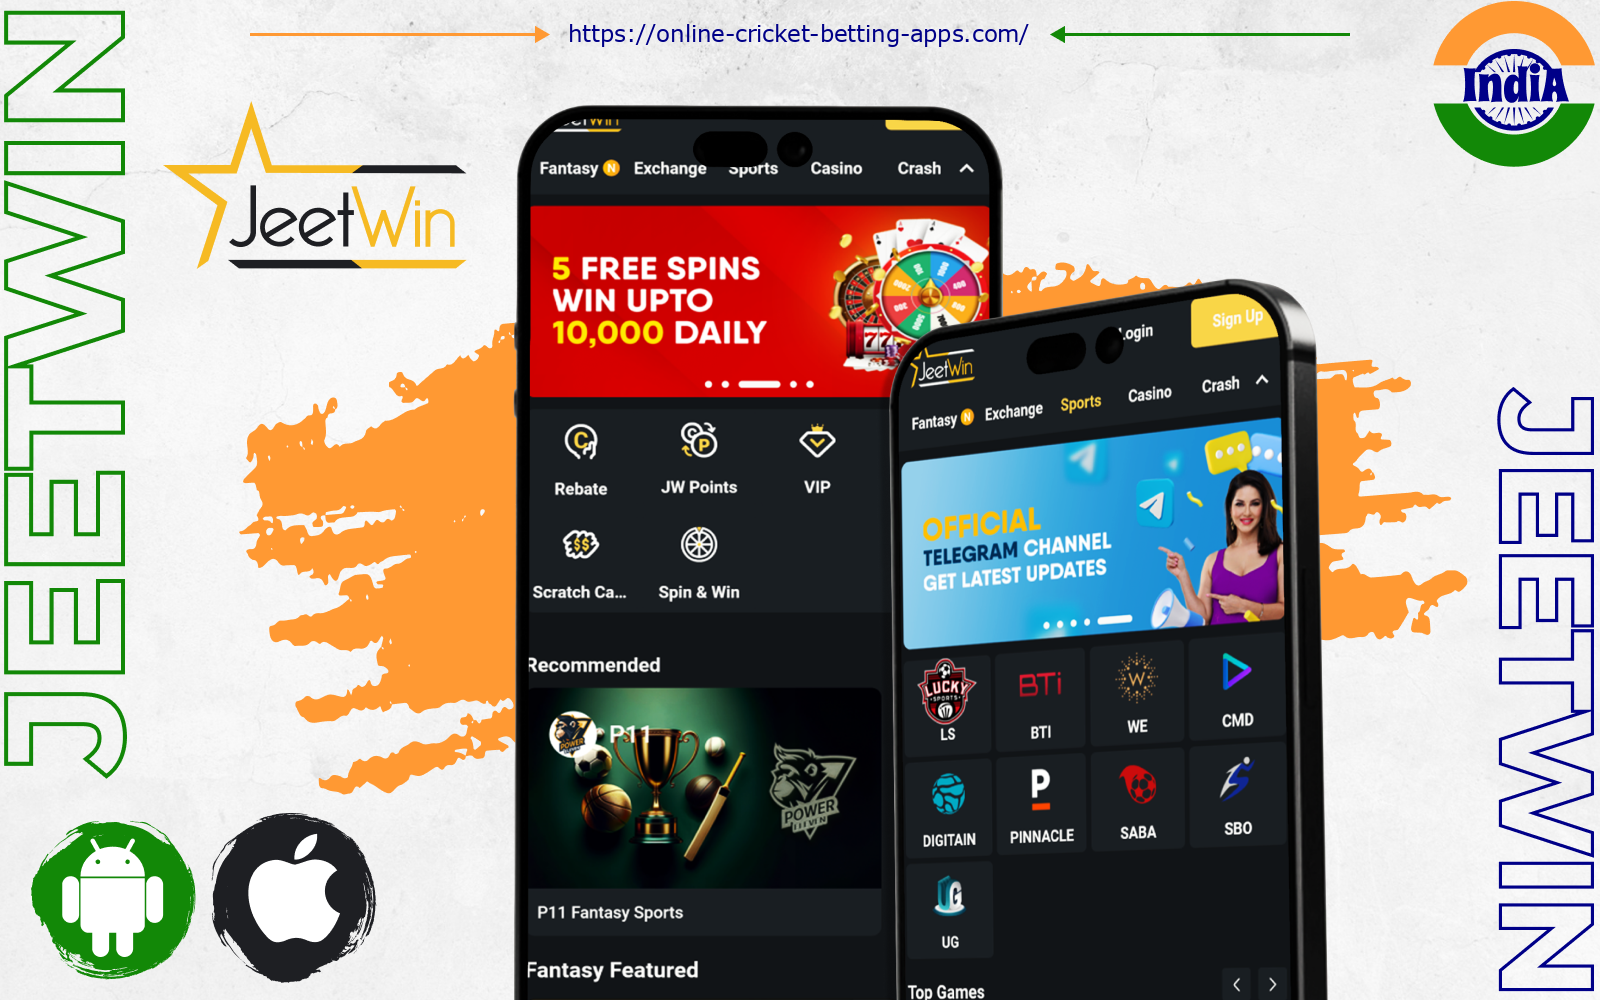 Jeetwin one of the best cricket betting apps will allow Indian bettors to quickly find the right match and navigate between sections